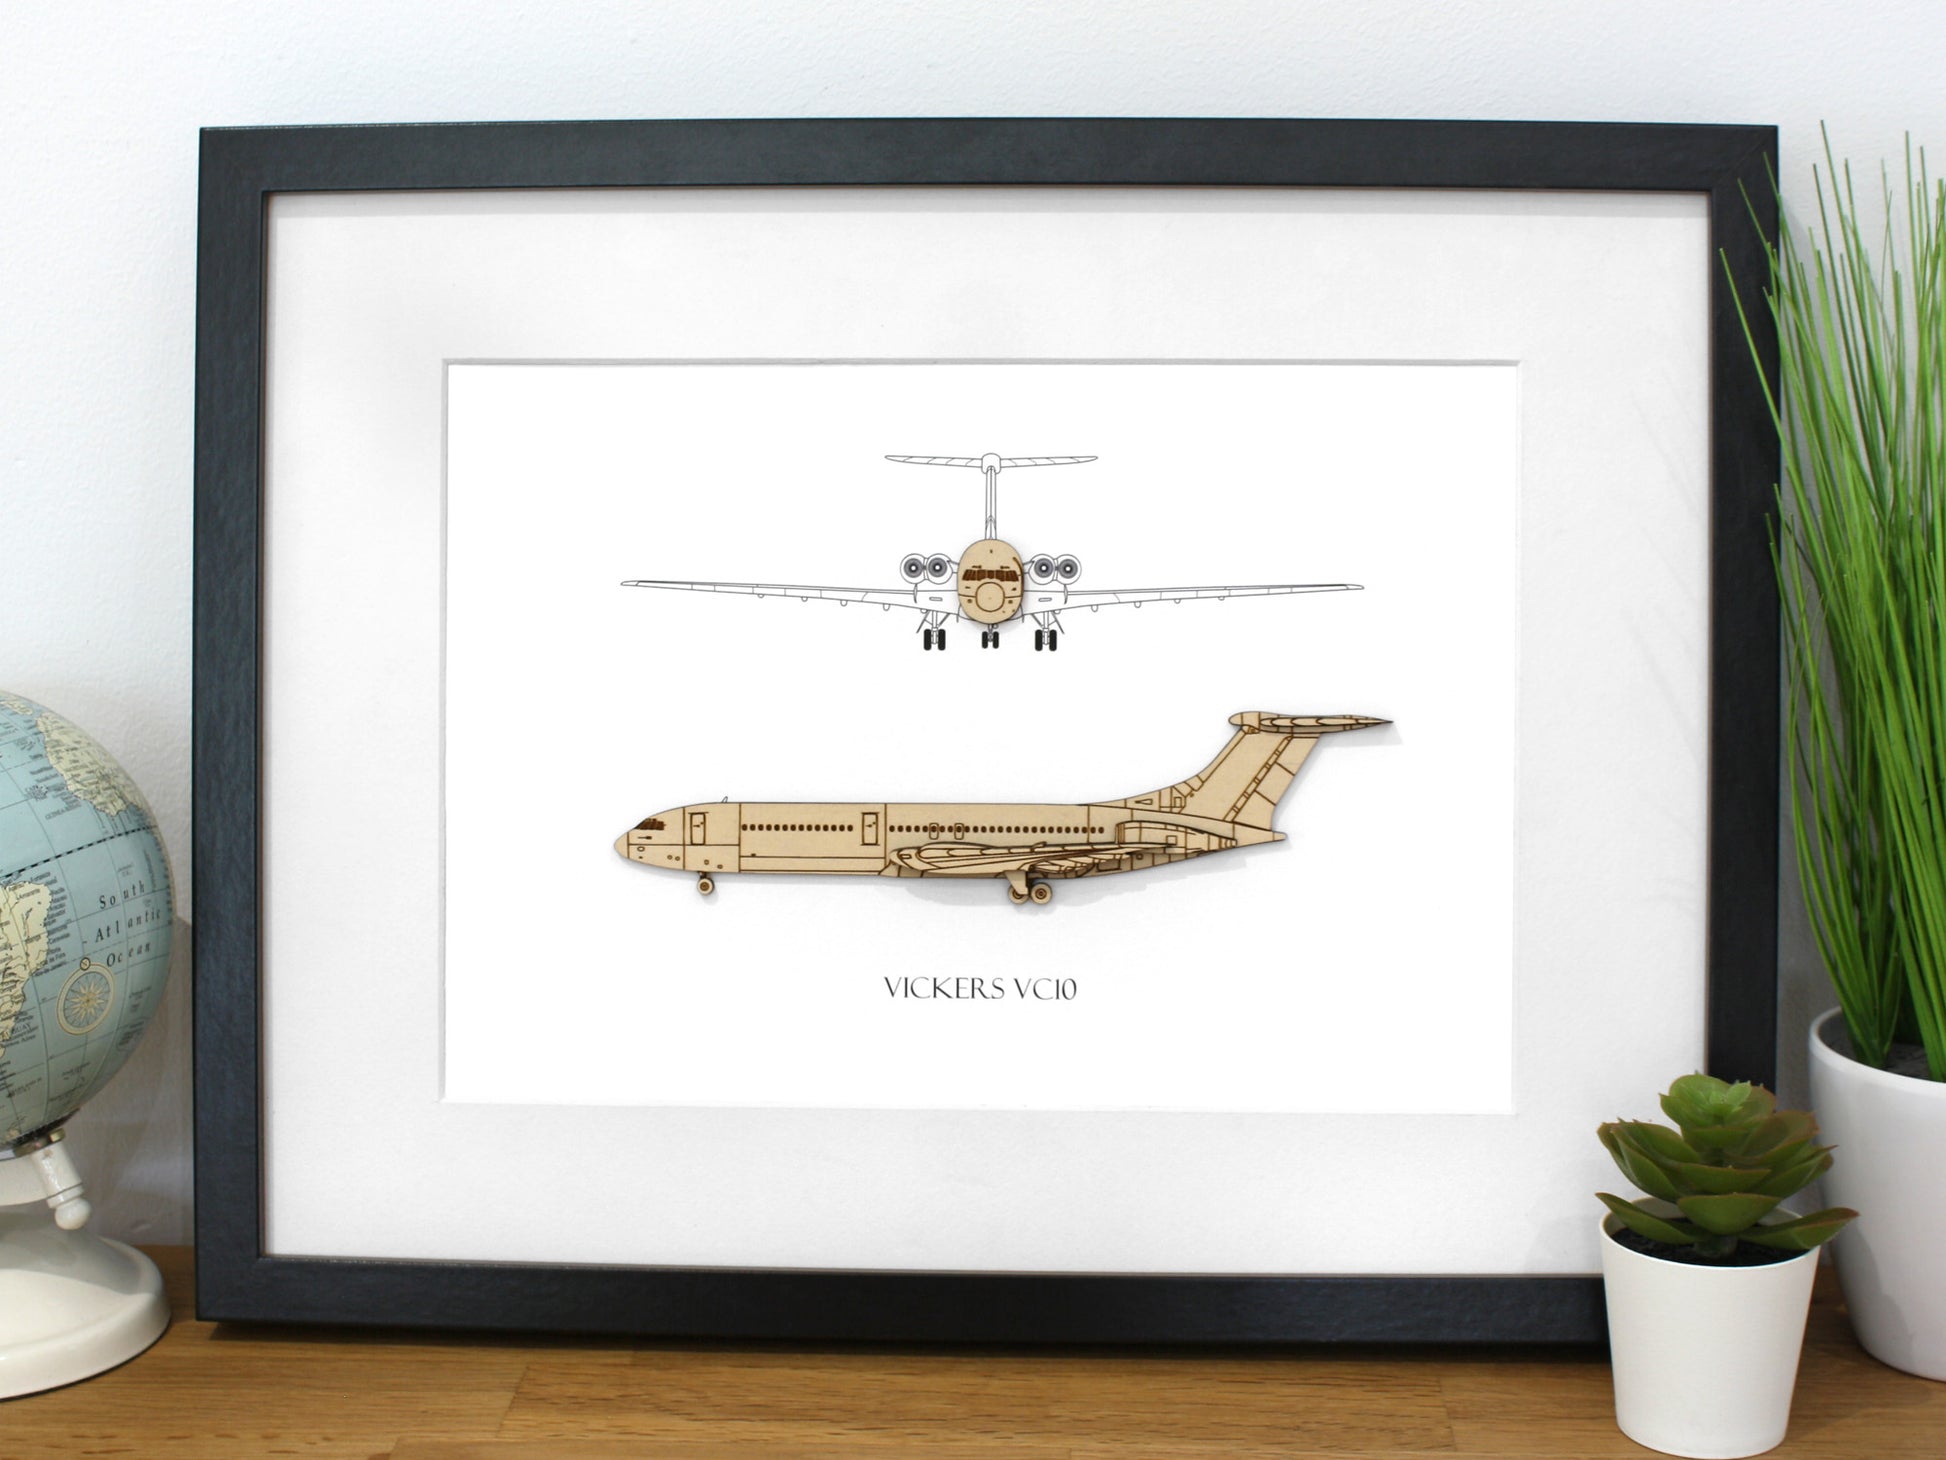 Vickers VC10 aviation gift